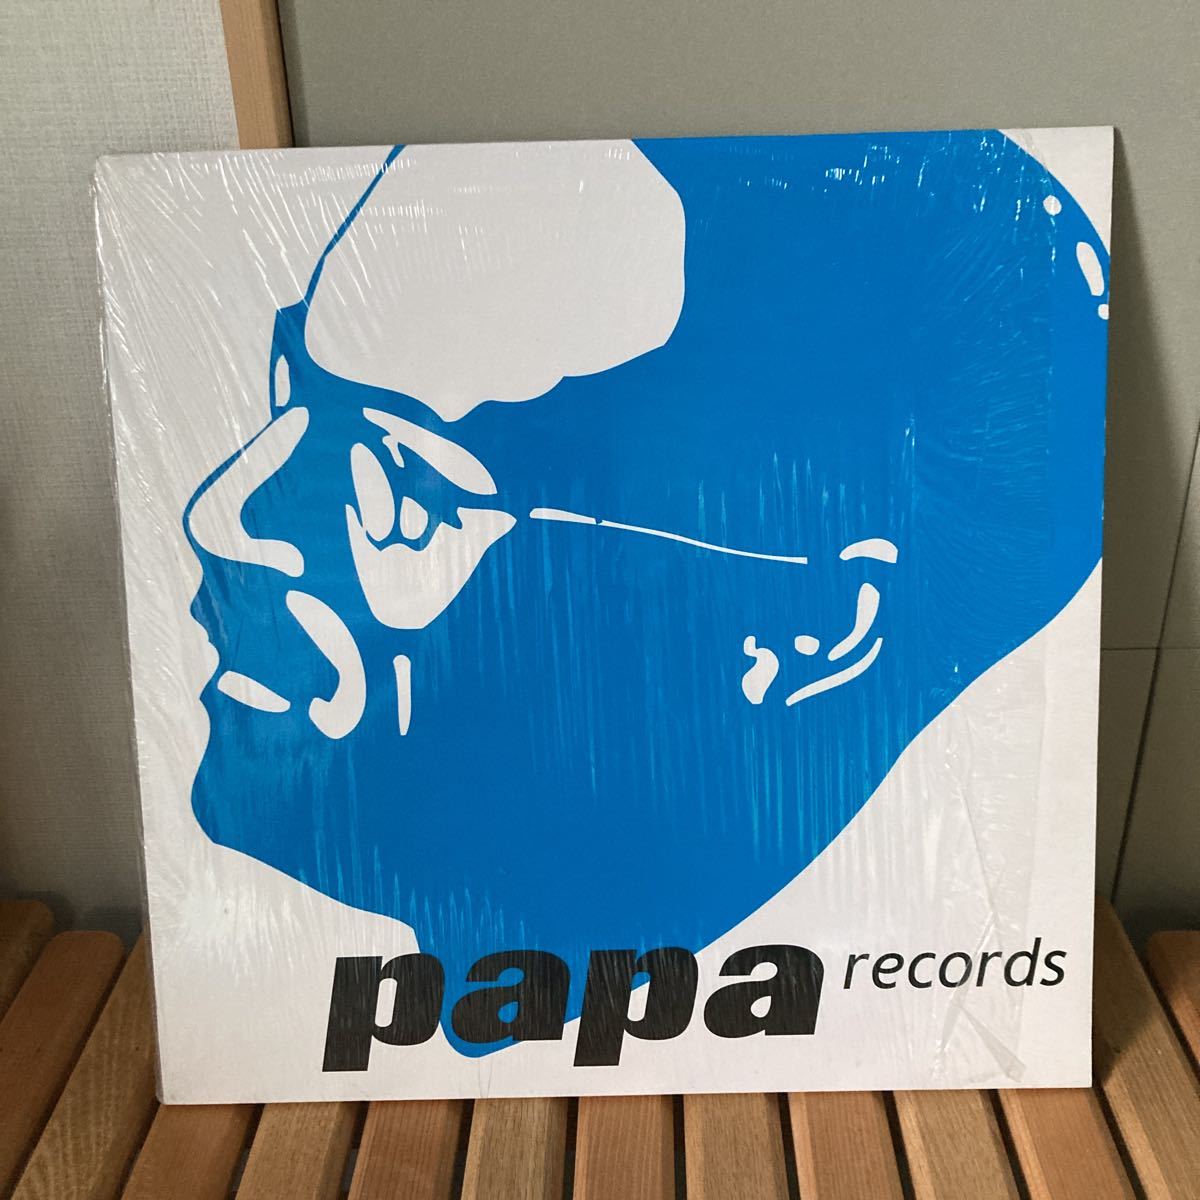 PAPA records、real people feat nathan haines、12インチ、deep house！ハウスヴォーカル_画像1